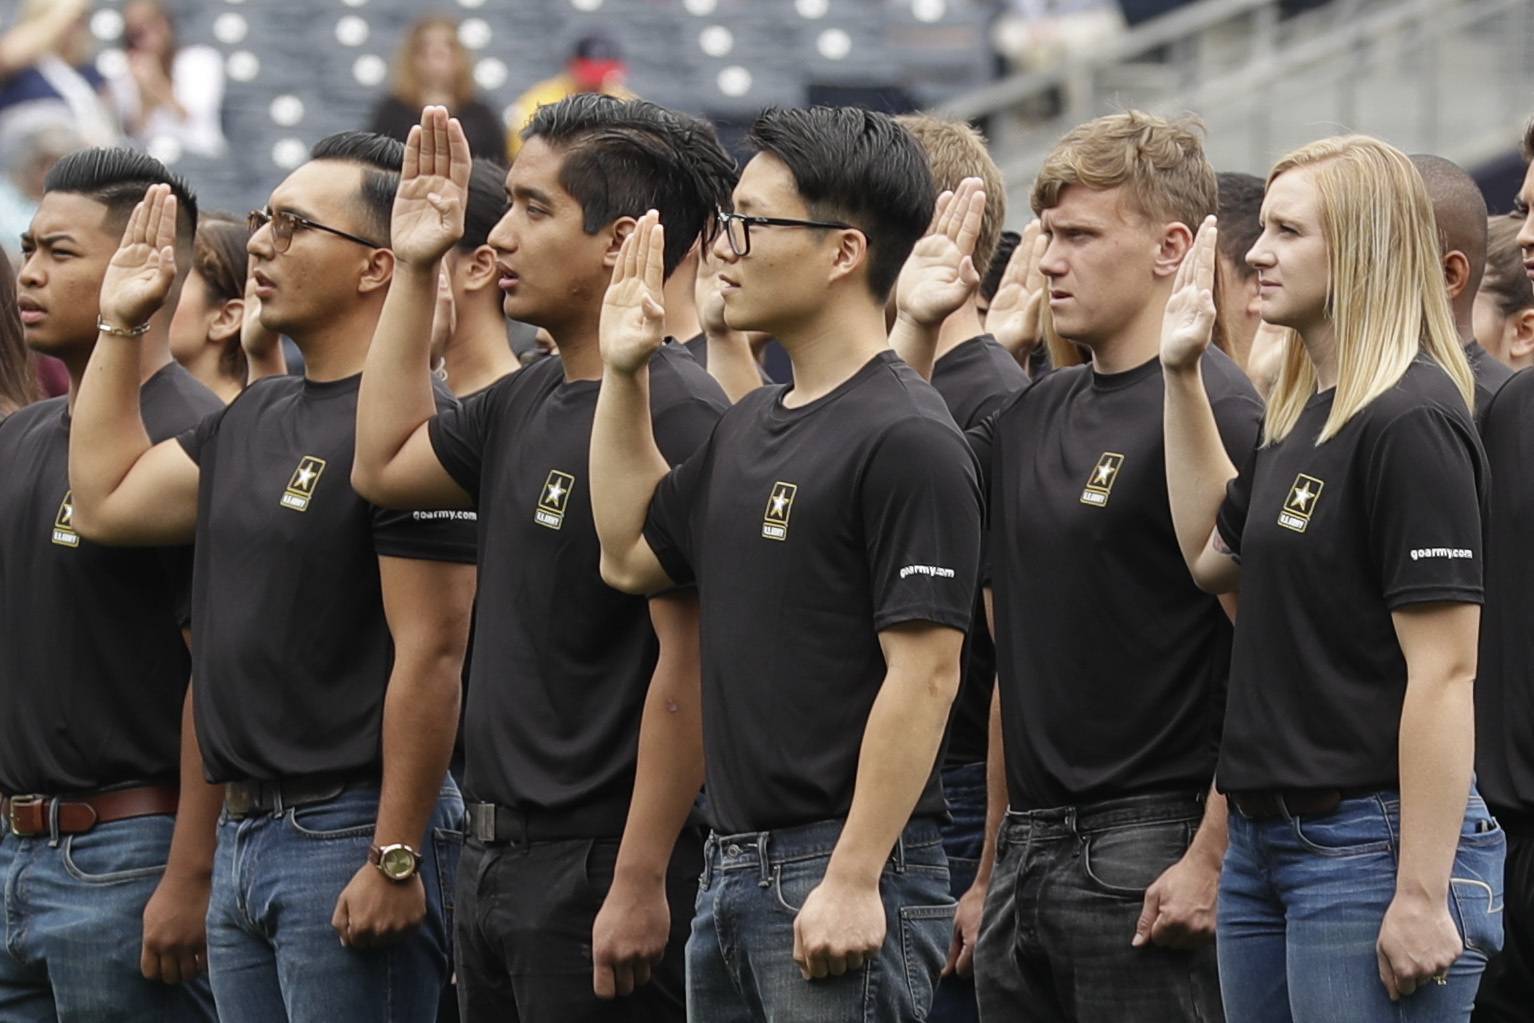 FILE - In this June 4, 2017, file photo. nNew Army recruits take part in a swearing in ceremony before a baseball game between the San Diego Padres and the Colorado Rockies in San Diego. A year after failing to meet its enlistment goal for the first time in 13 years, the U.S. Army is now on track to meet a lower 2019 target after revamping its recruitment effort. (AP Photo/Gregory Bull, File)